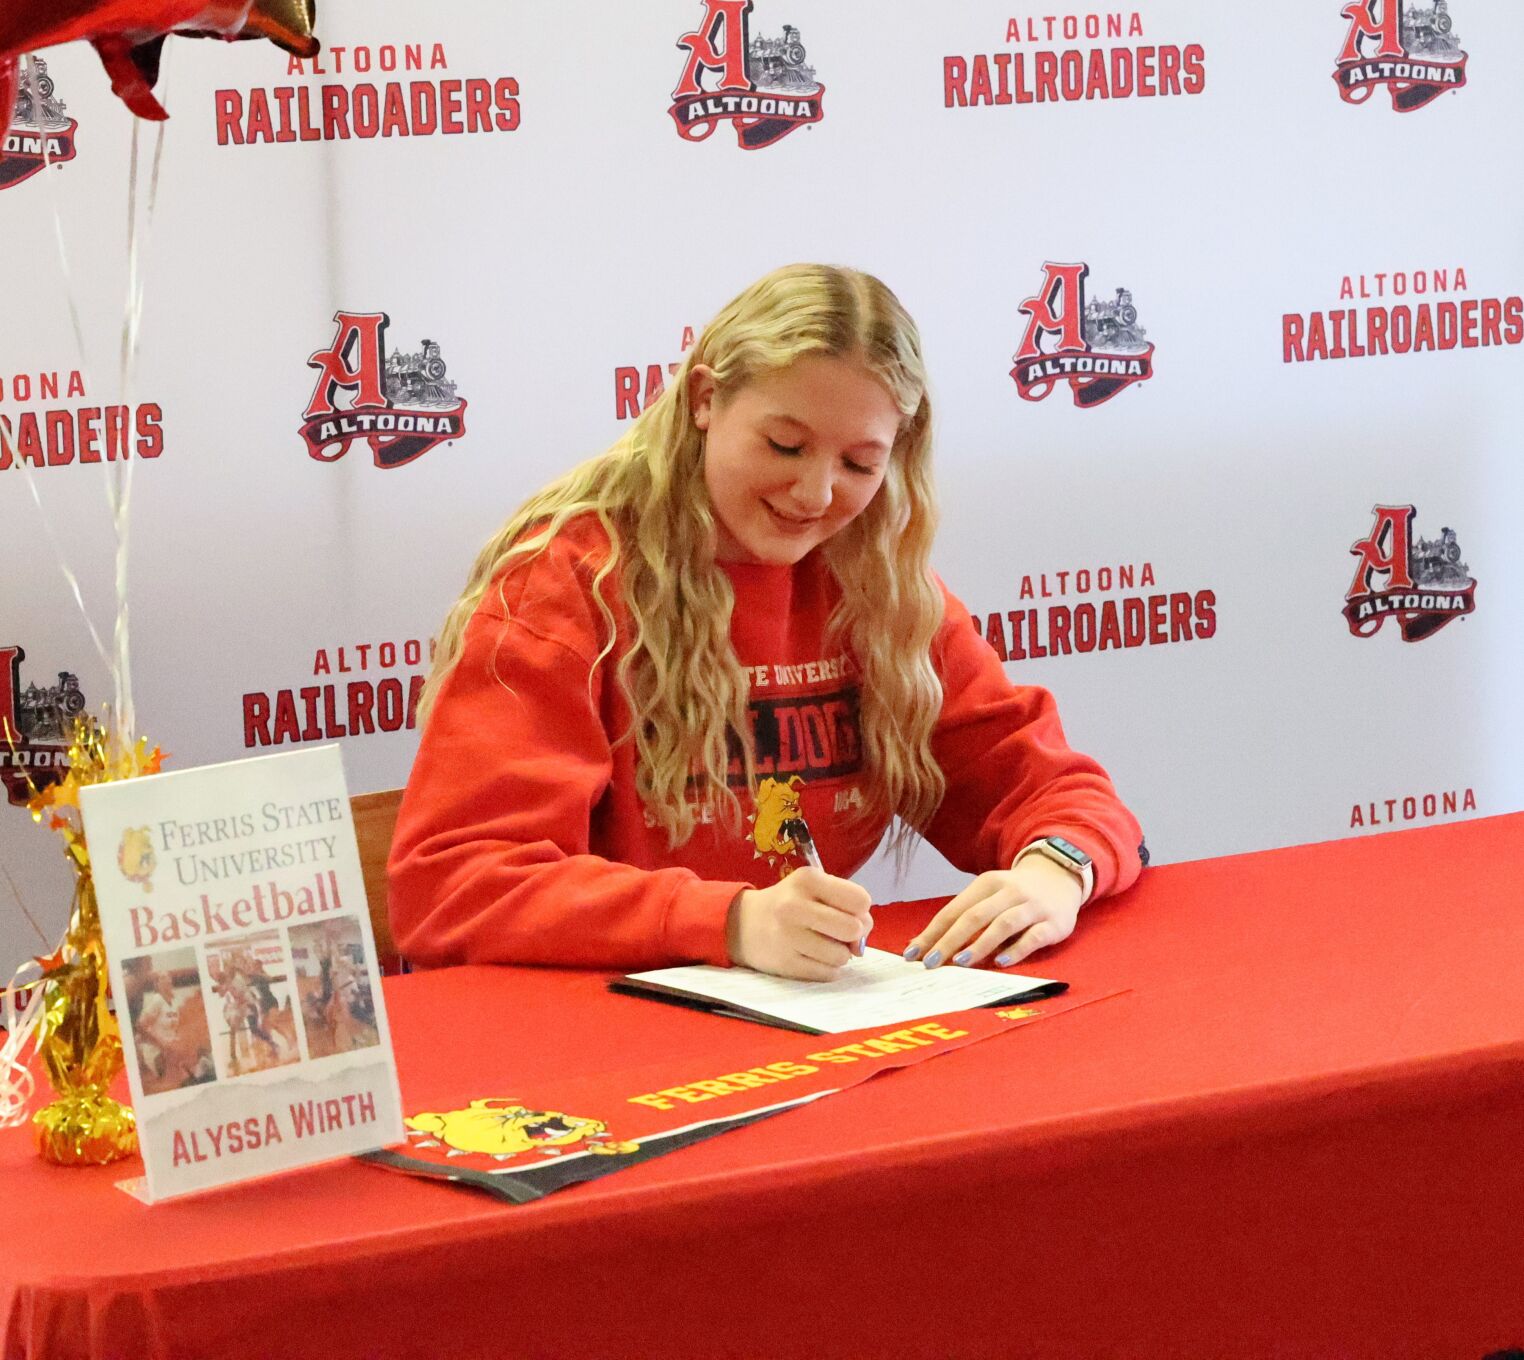 Pen to paper: Altoona’s Wirth signs NLI to make Ferris State commitment official